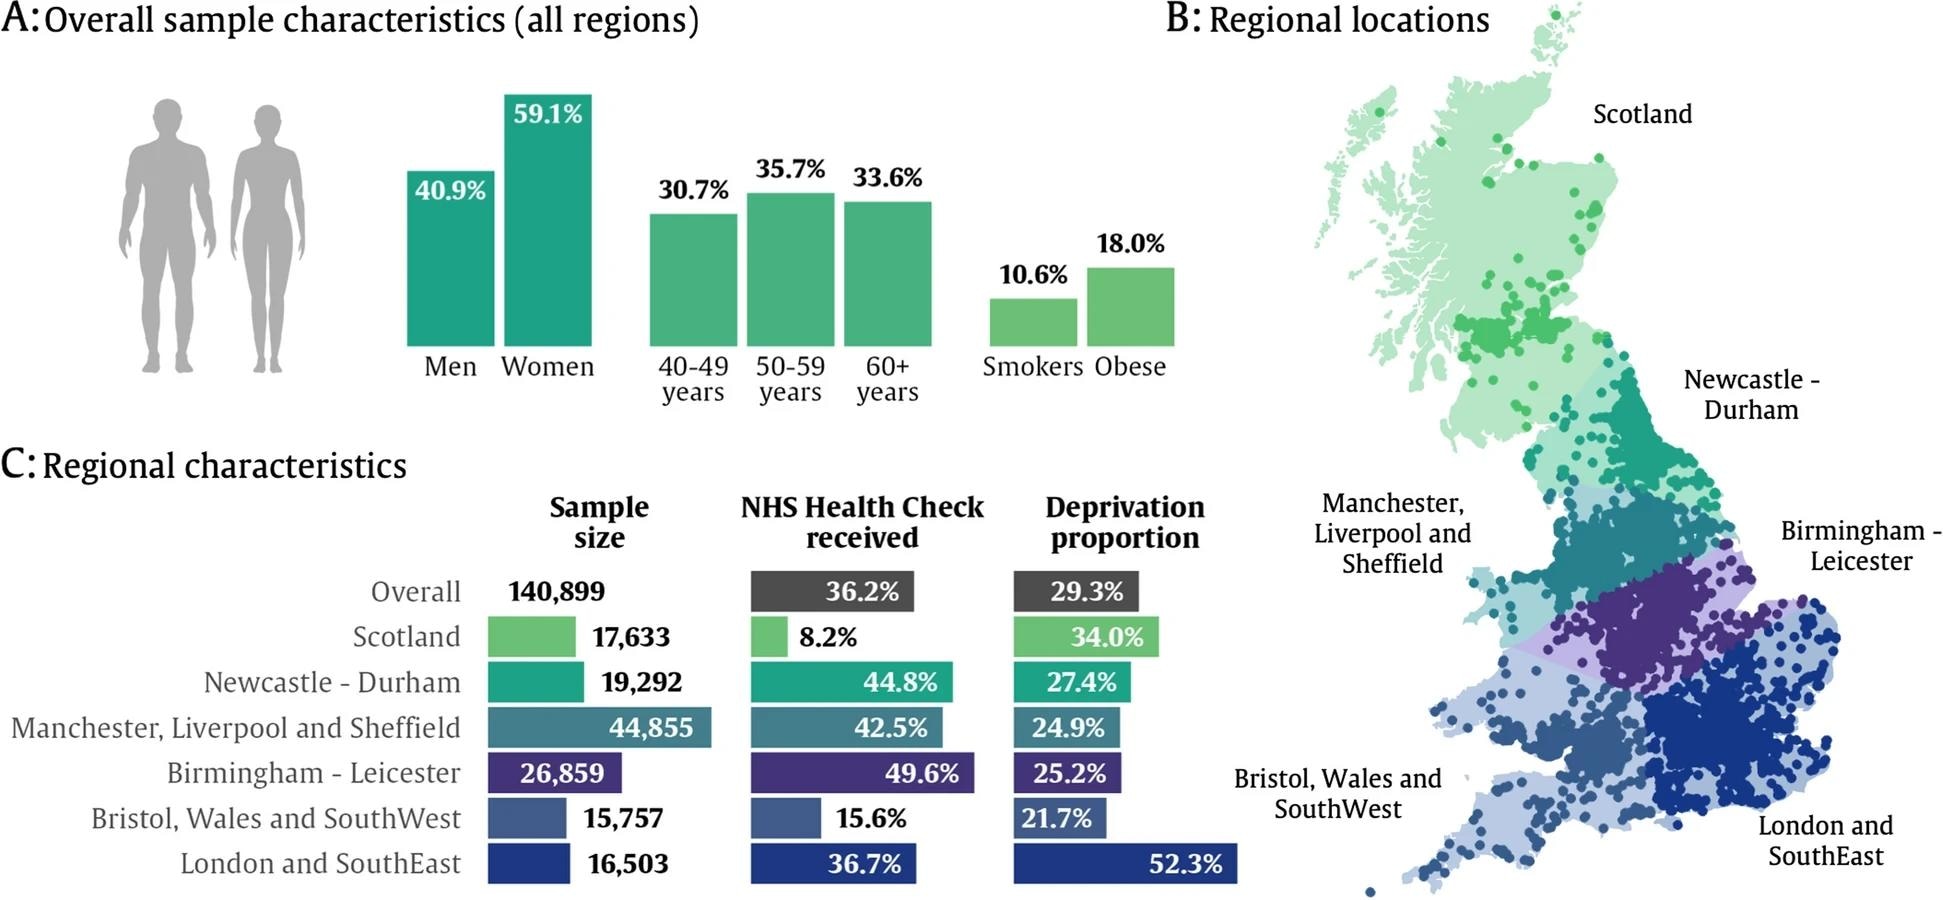 Summary of NHS Health Check in UK Biobank participants. A Overall summaries for the sample of UK Biobank participants with primary care available (n = 140,772). B Summary of geographical locations. C Sample characteristics by geographical region. Deprivation proportion refers to the proportion of the sample that fall above the UK median for socio-economic deprivation according to reported Townsend deprivation scores and quintiles from the 2011 census